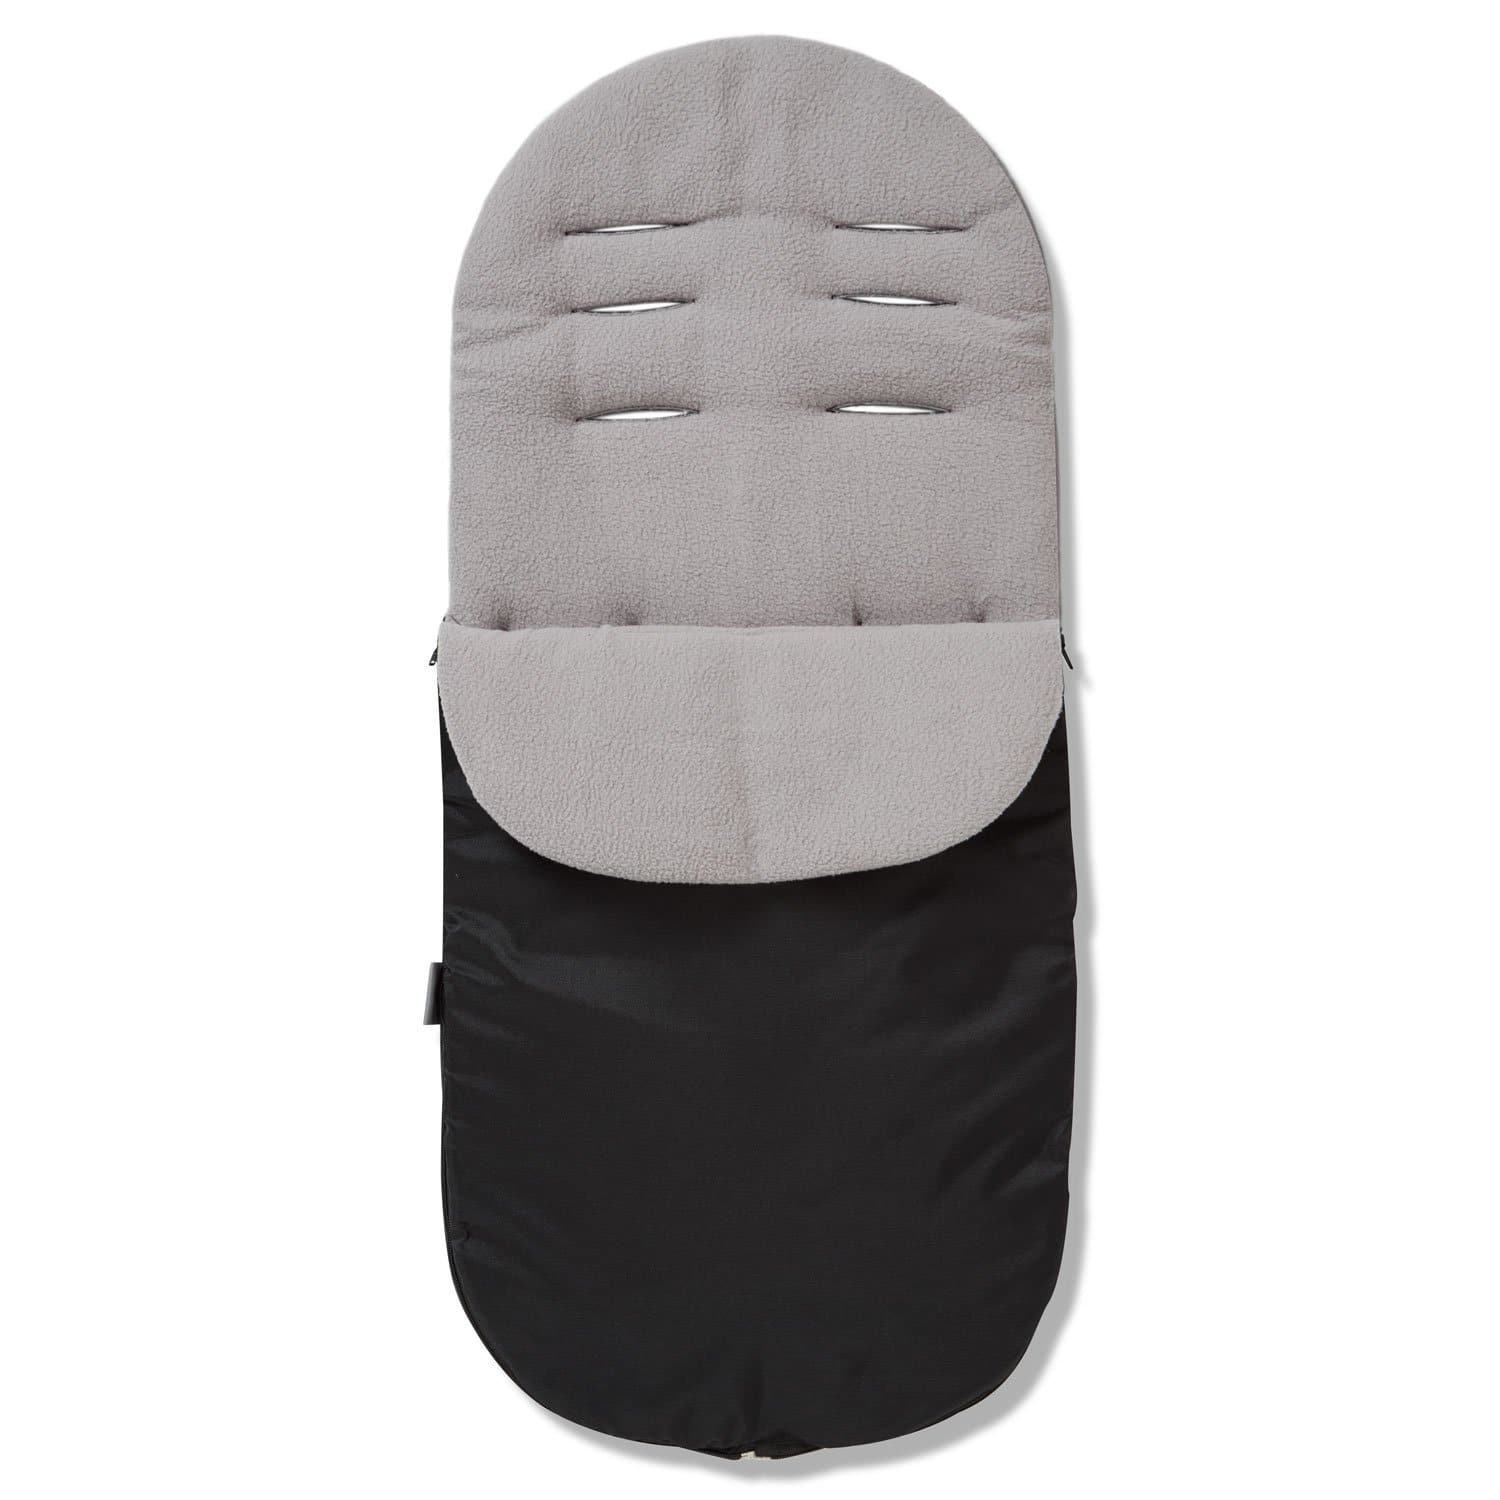 Footmuff / Cosy Toes Compatible with Chicco - Grey / Fits All Models | For Your Little One